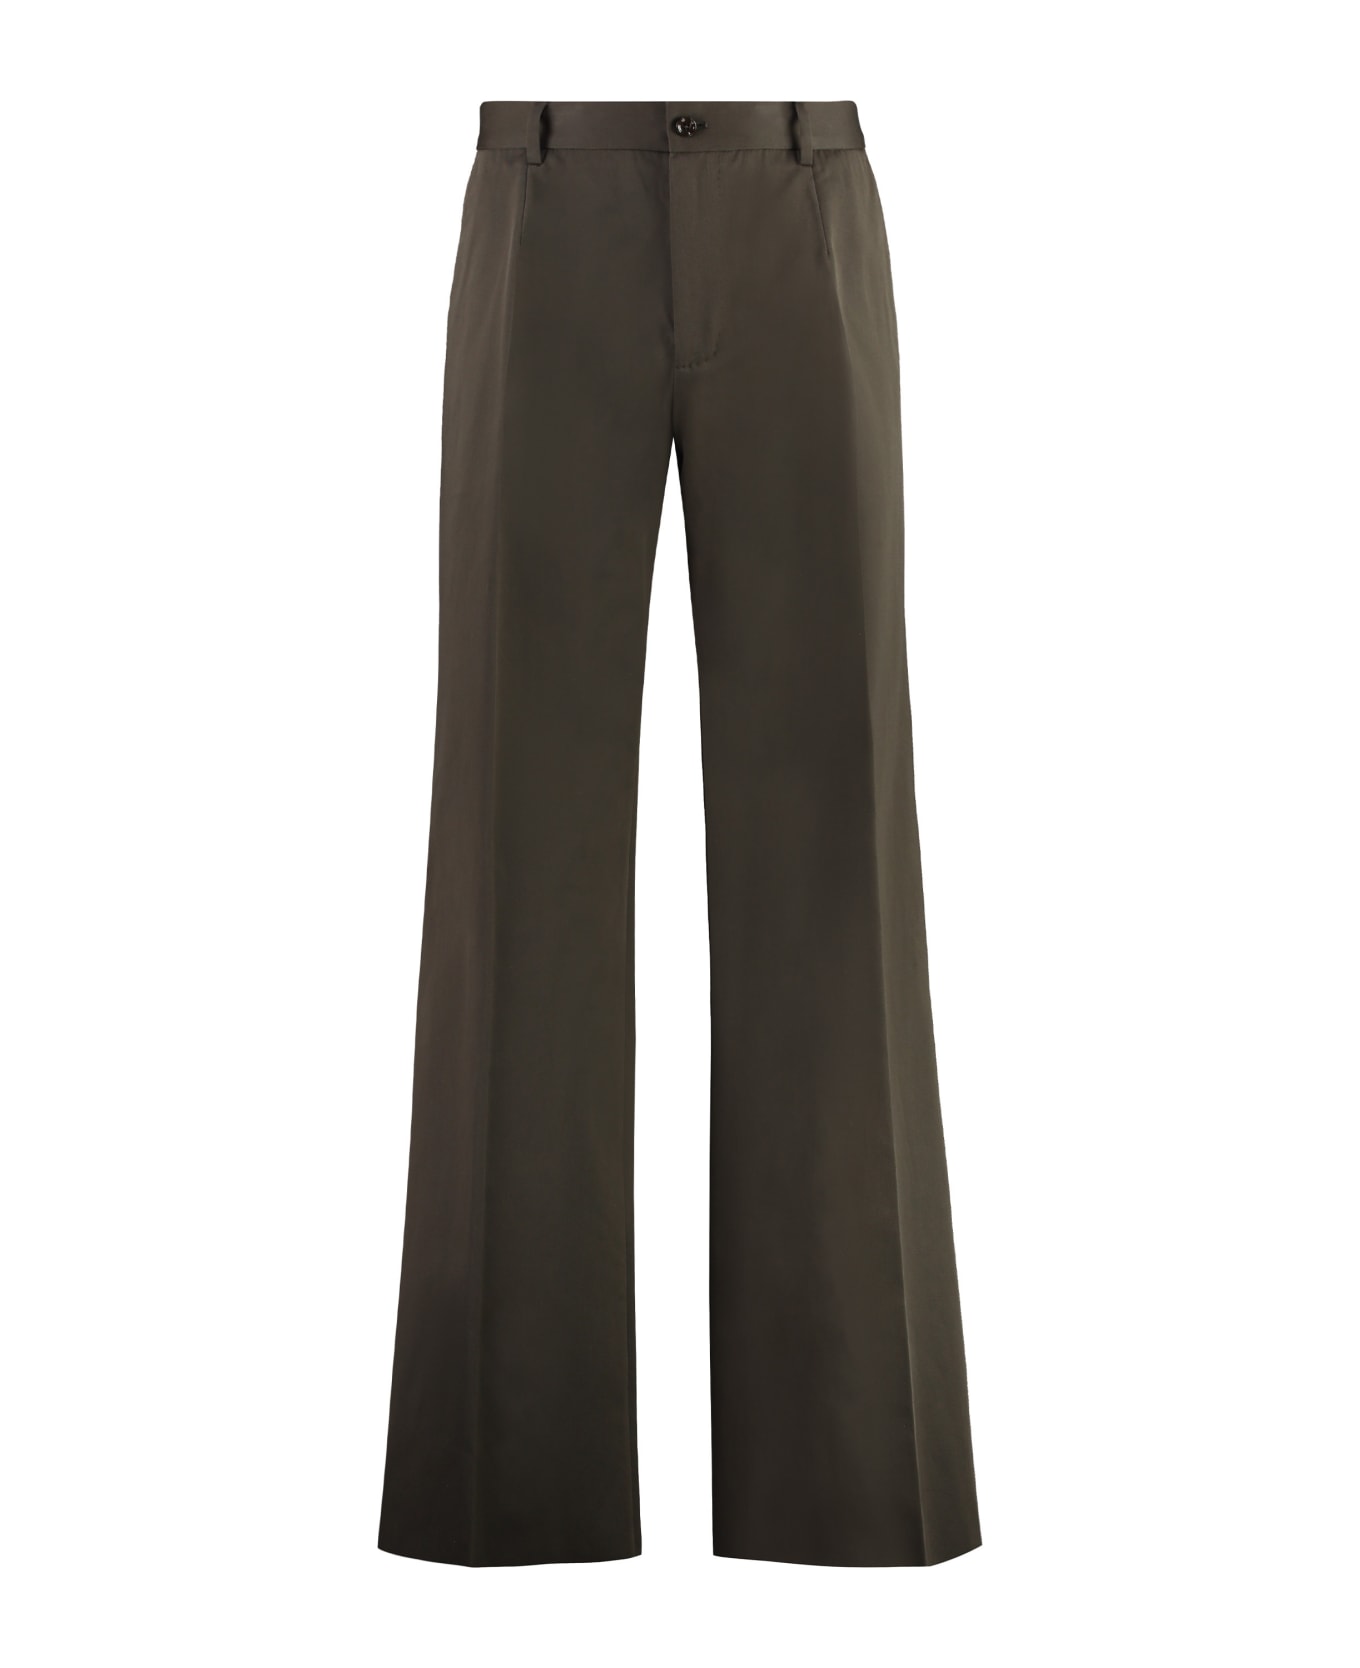 Dolce & Gabbana Cotton Trousers - brown ボトムス